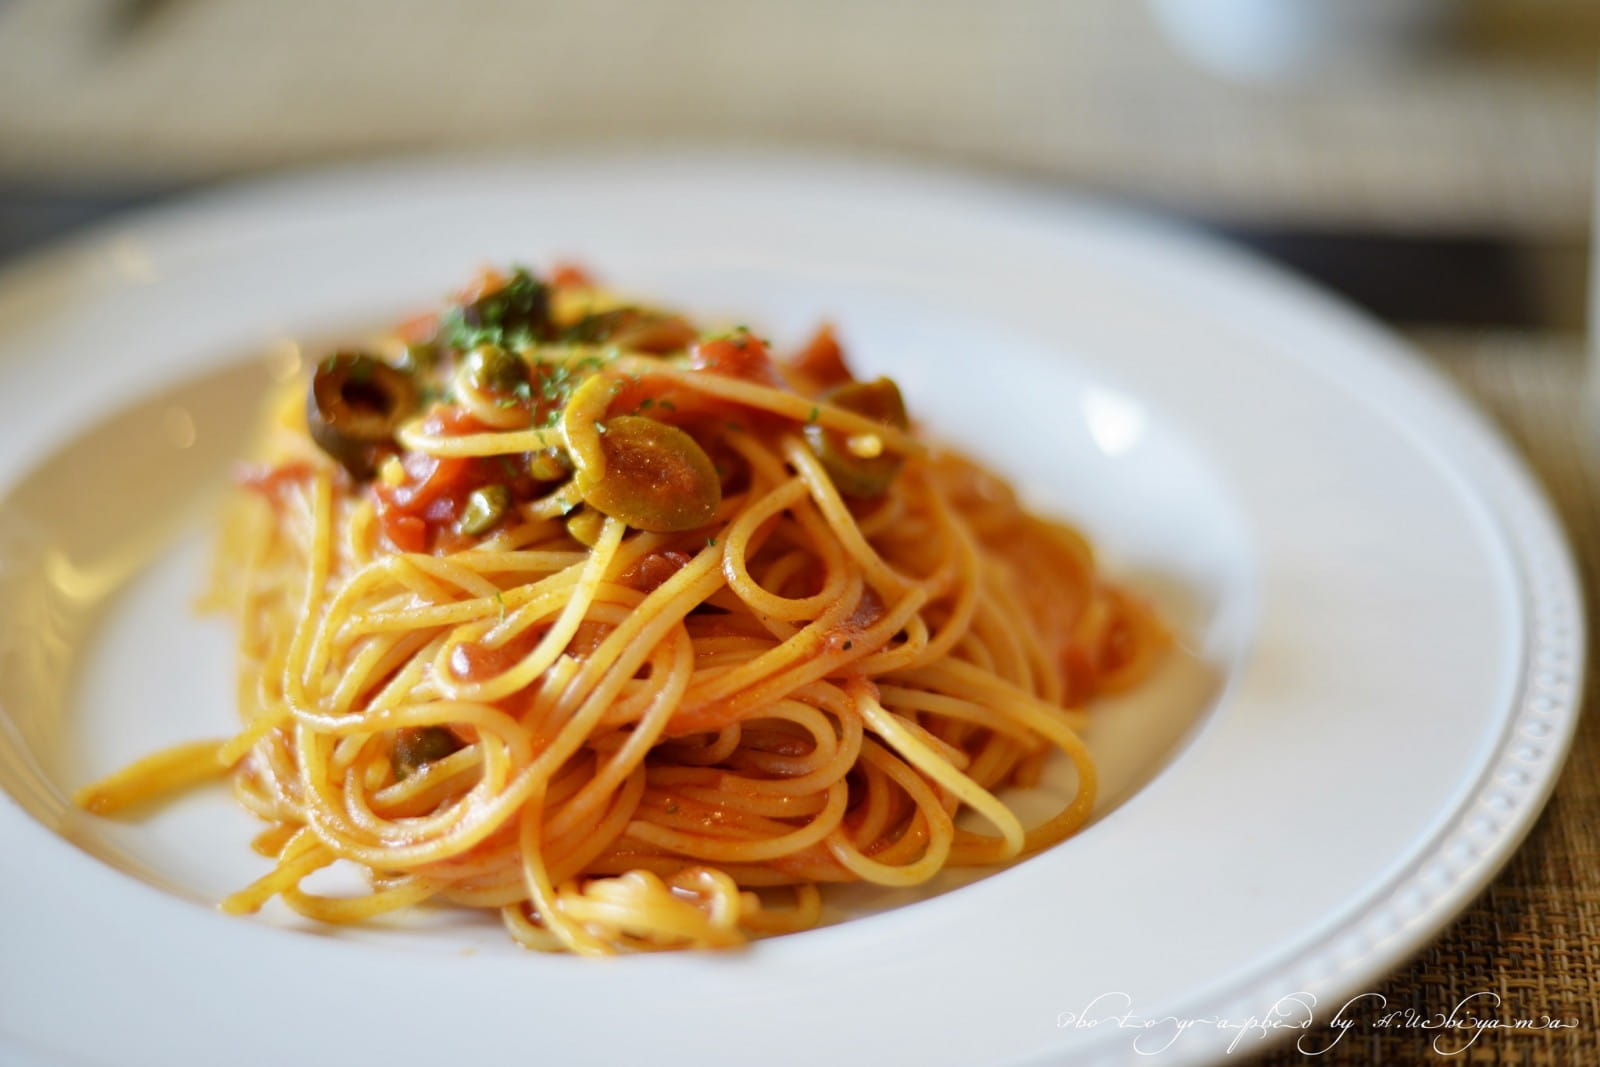 The best wine pairings for spaghetti puttanesca